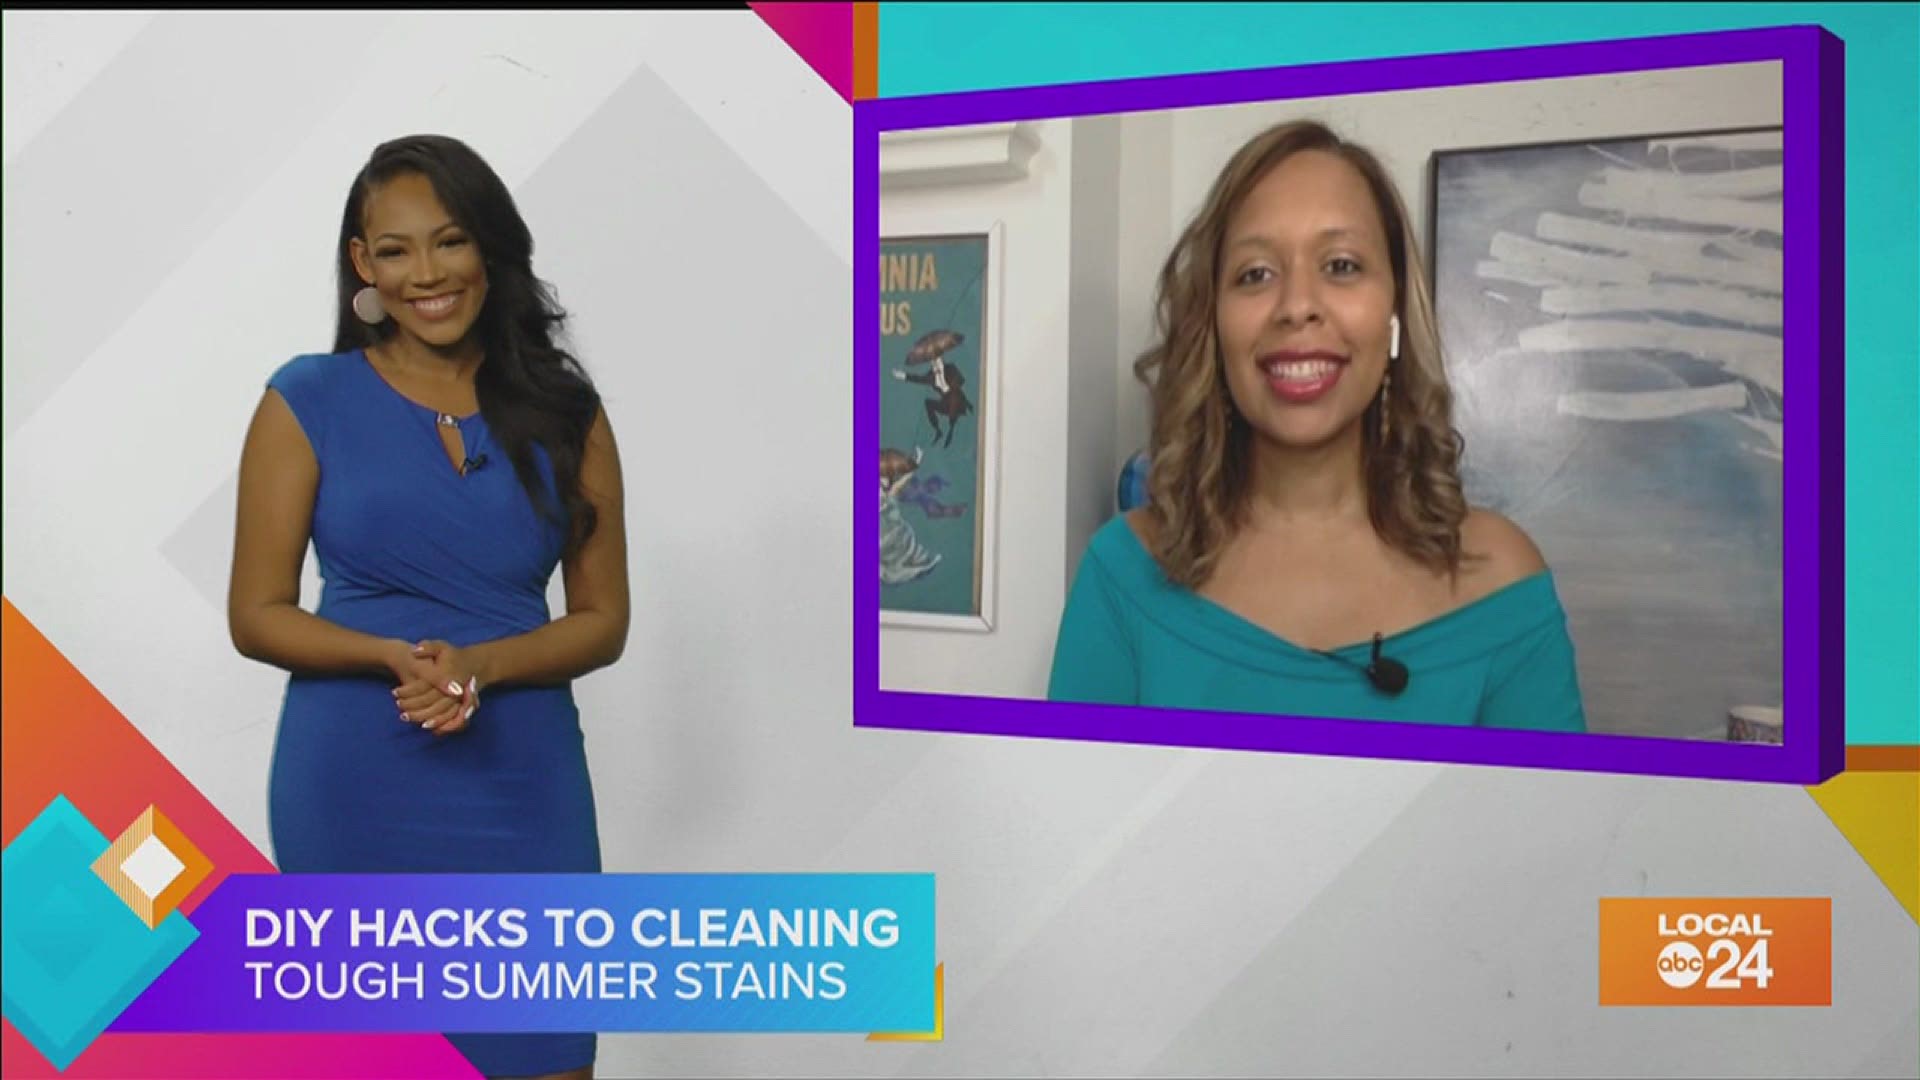 From grass stains to barbeque stains, remove those common summer stains with these DIY tips from lifestyle expert Victoria Sophia! Only on "The Shortcut!"